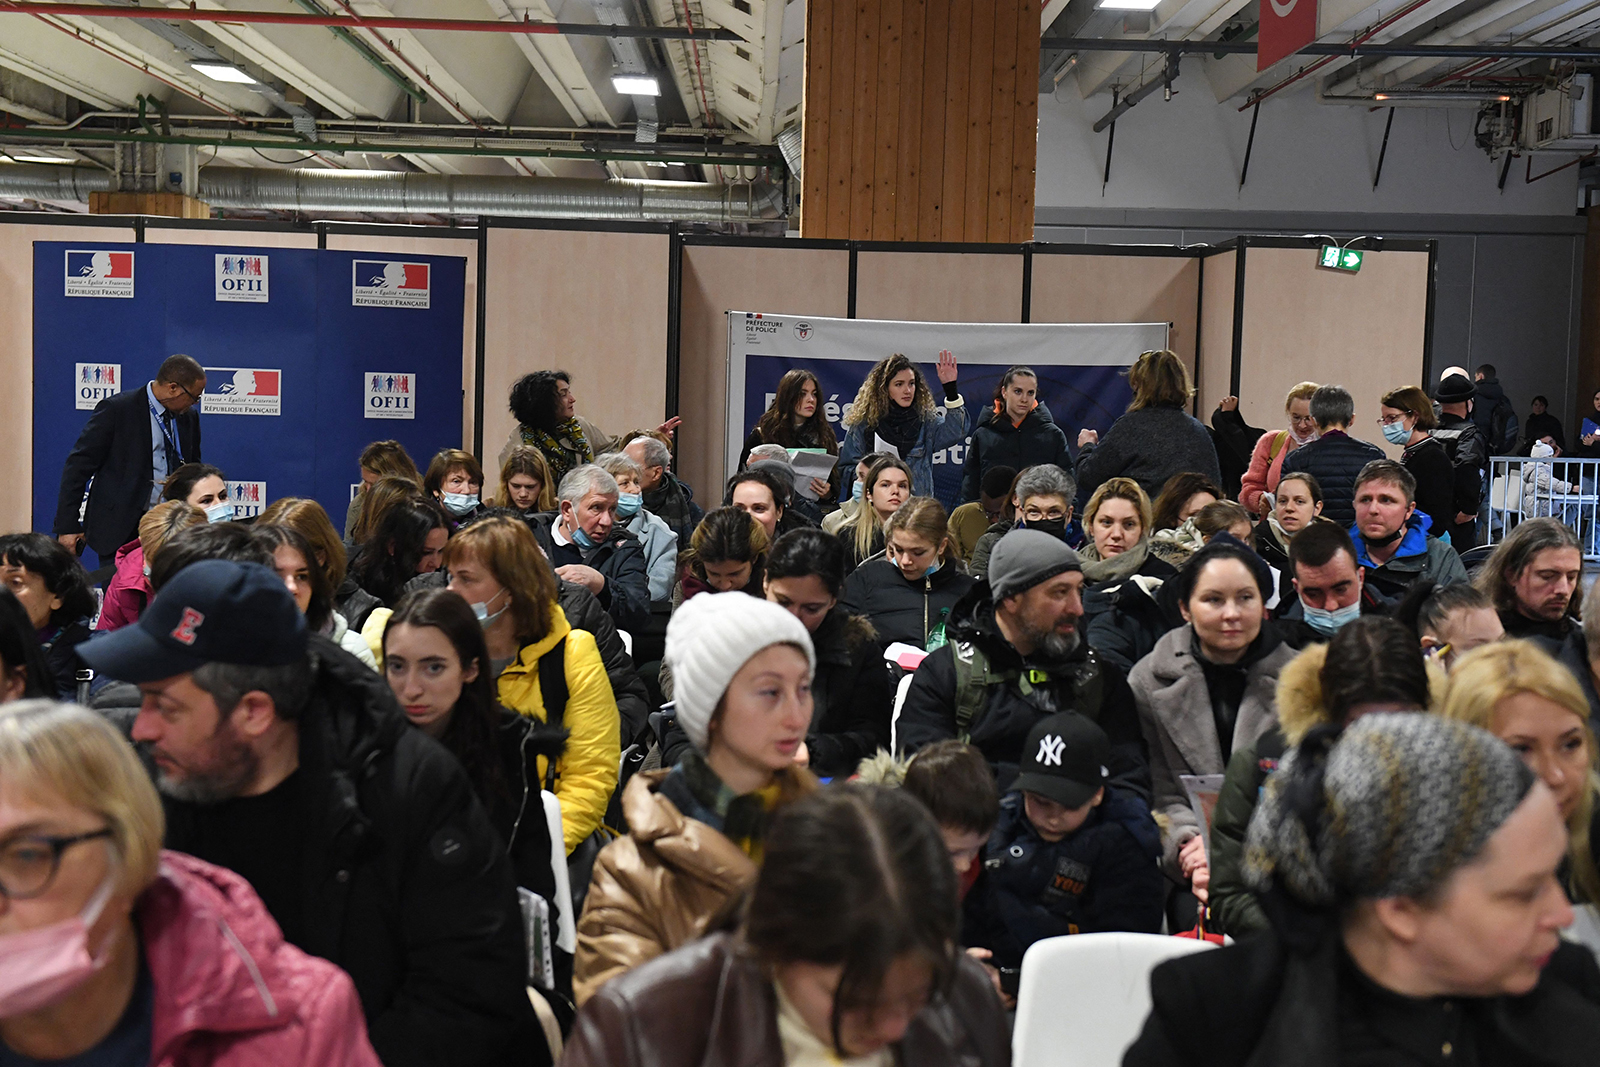 Ukrainians wait to register at a refugee welcome center in Paris on March 17.